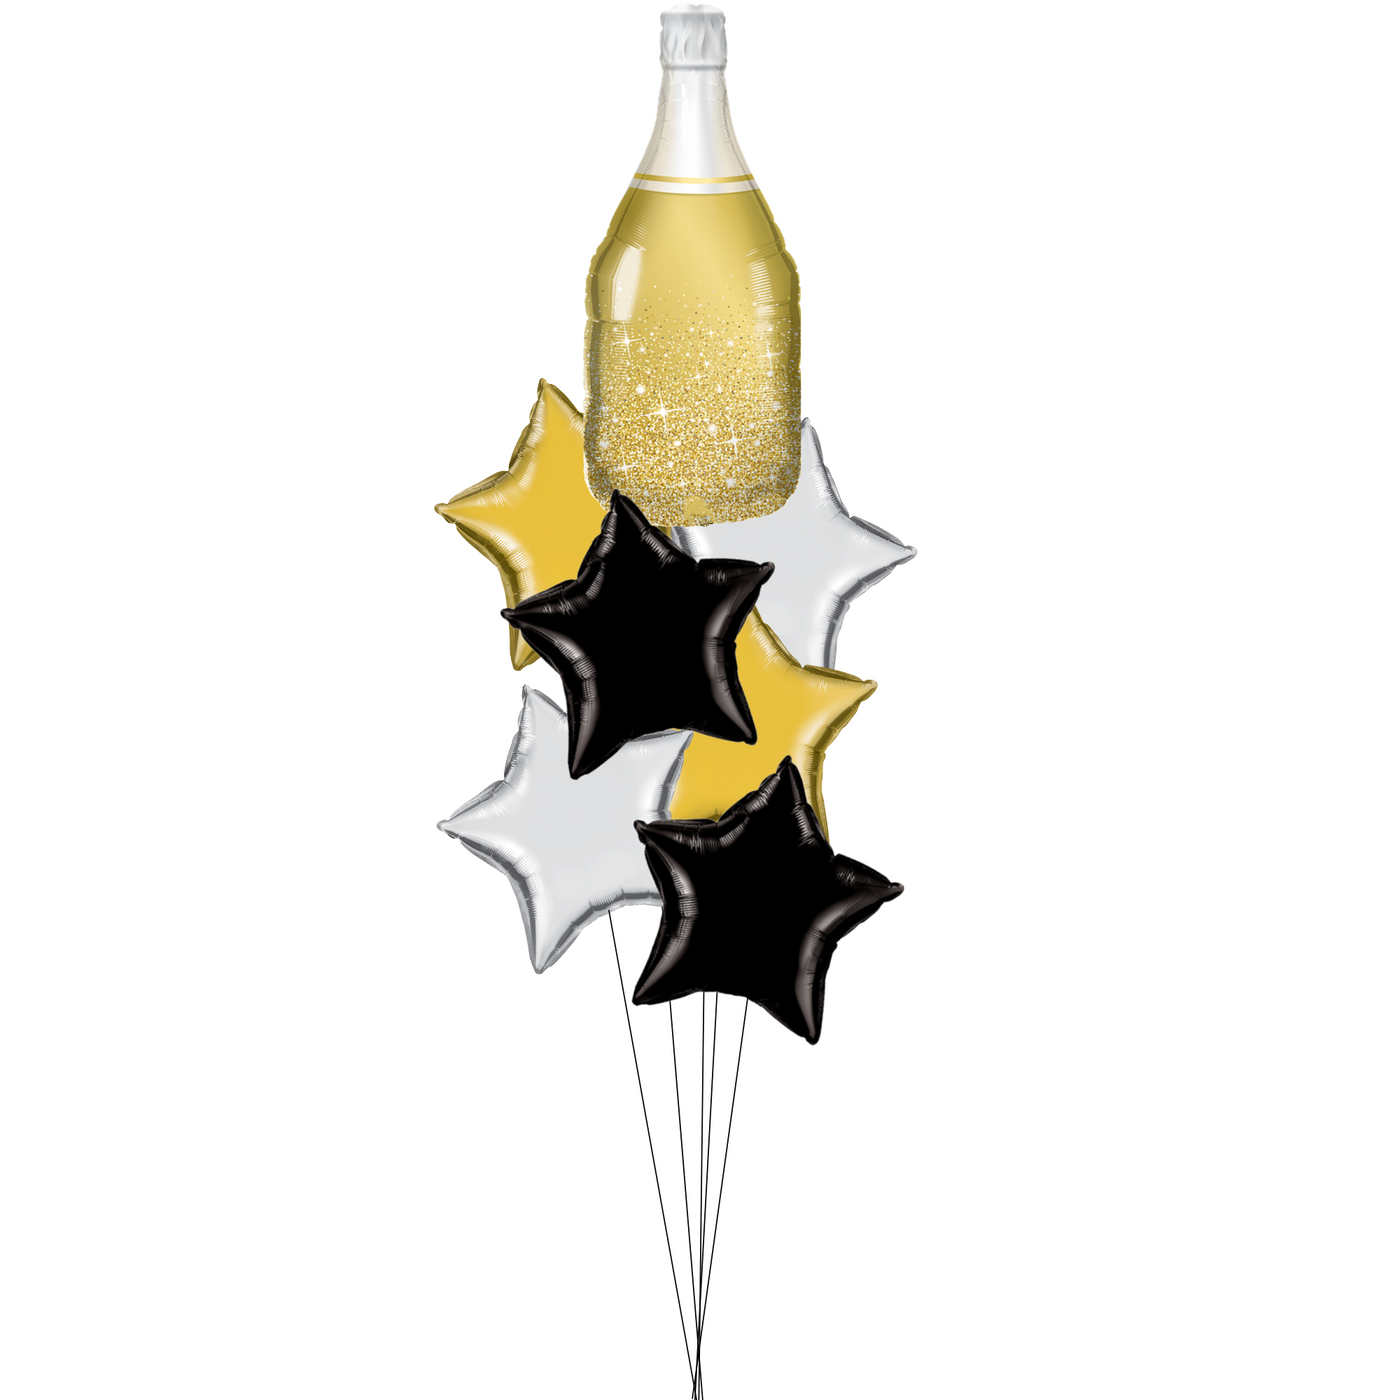 Sparkling Champagne & Stars - New Year's Eve Balloon Bouquet